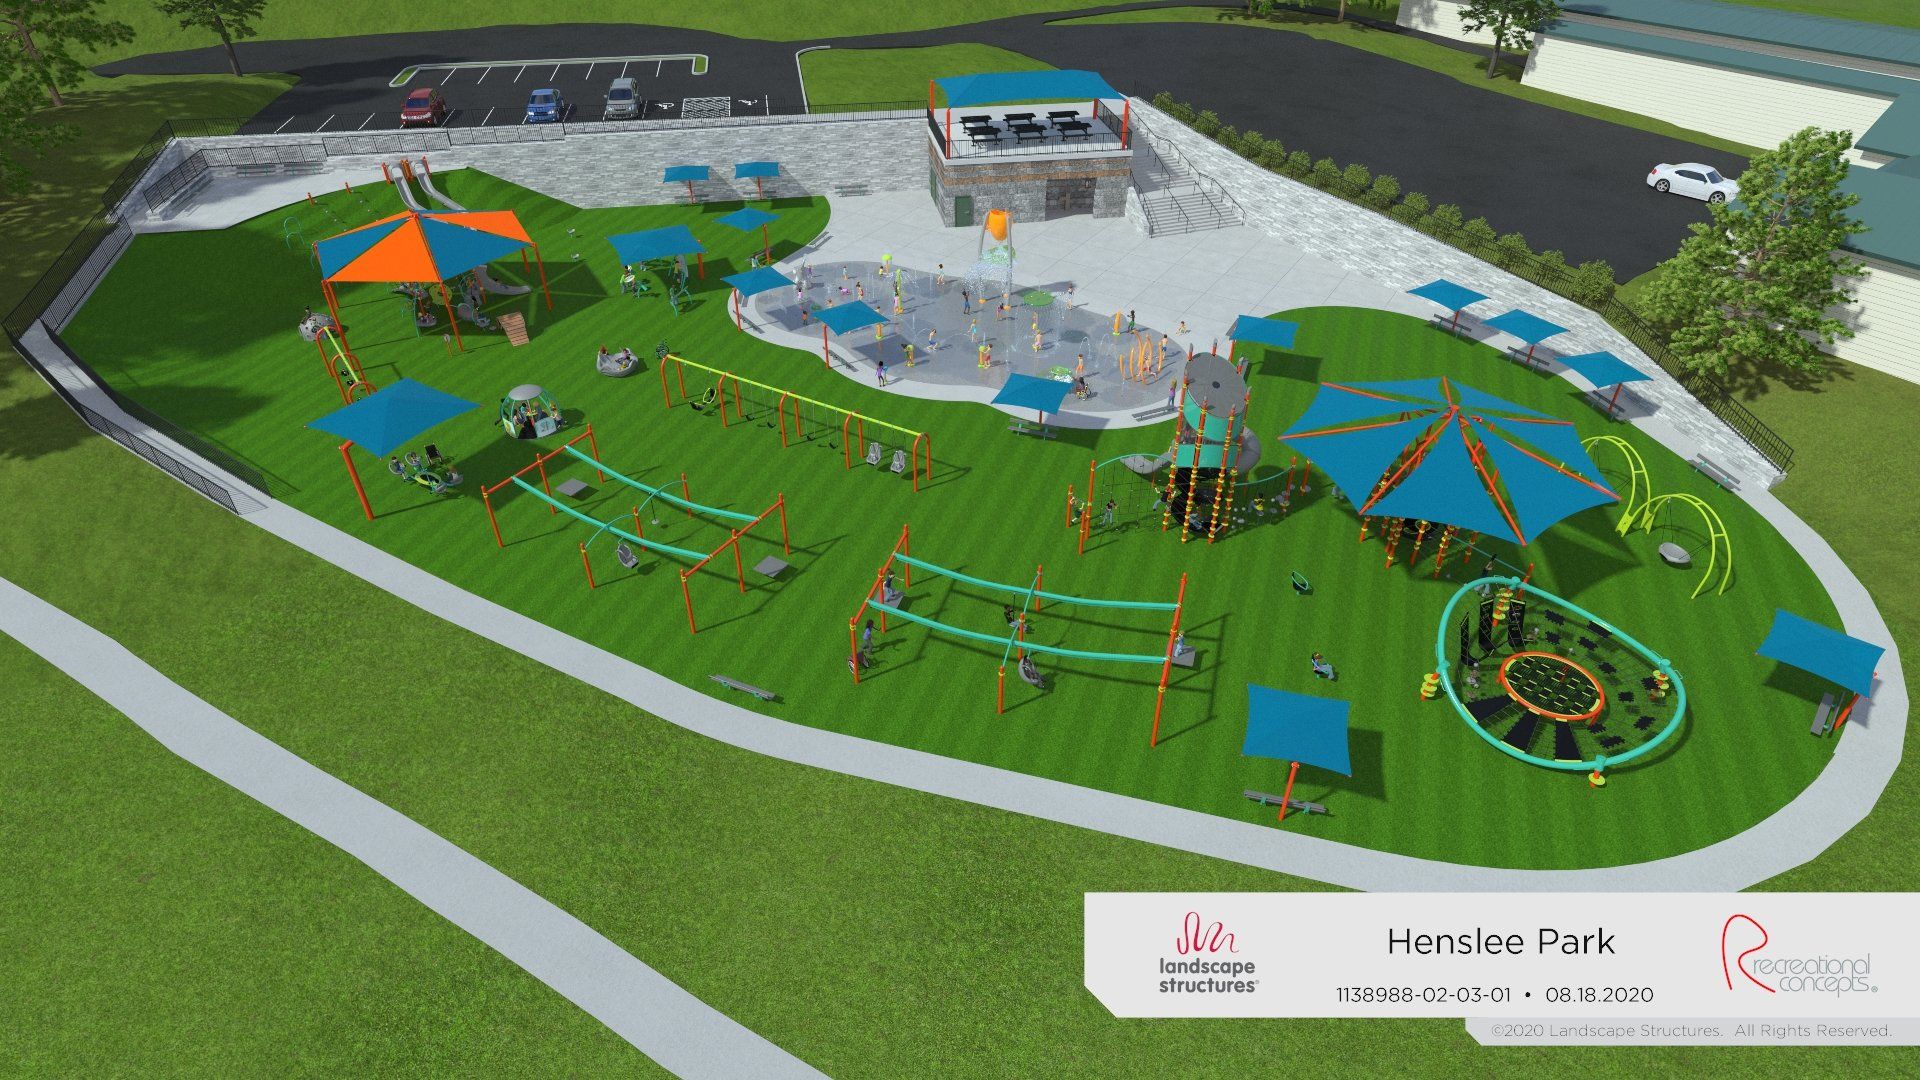 Conceptual drawing of a proposed splash pad and playground in Henslee Park.